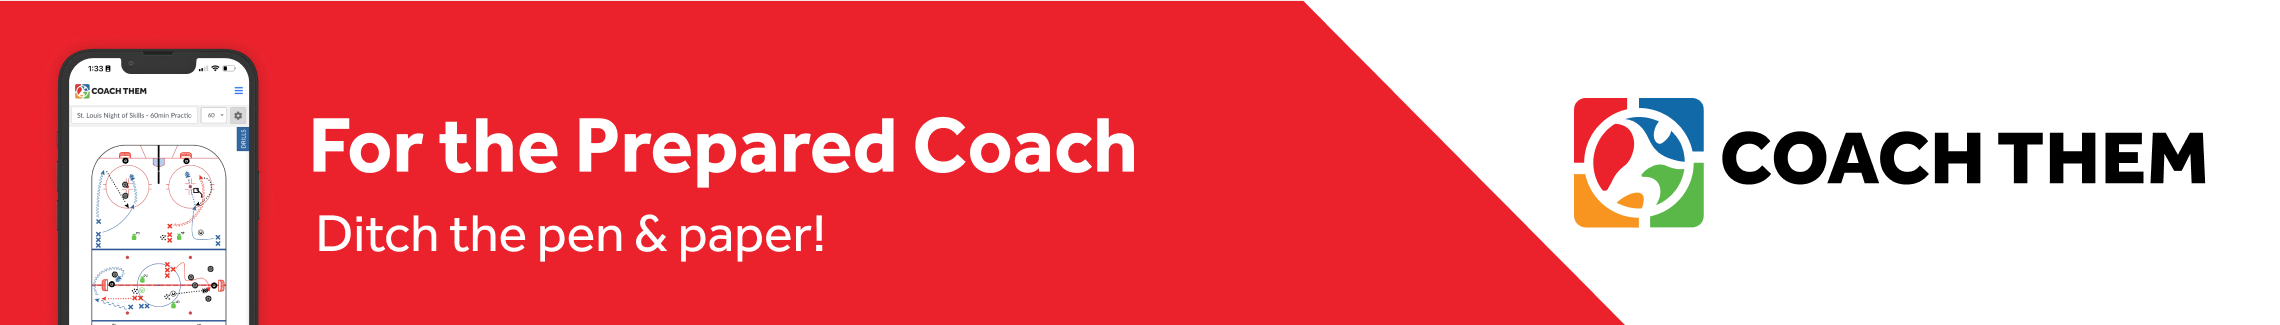 CoachThem - For the Prepared Coach!